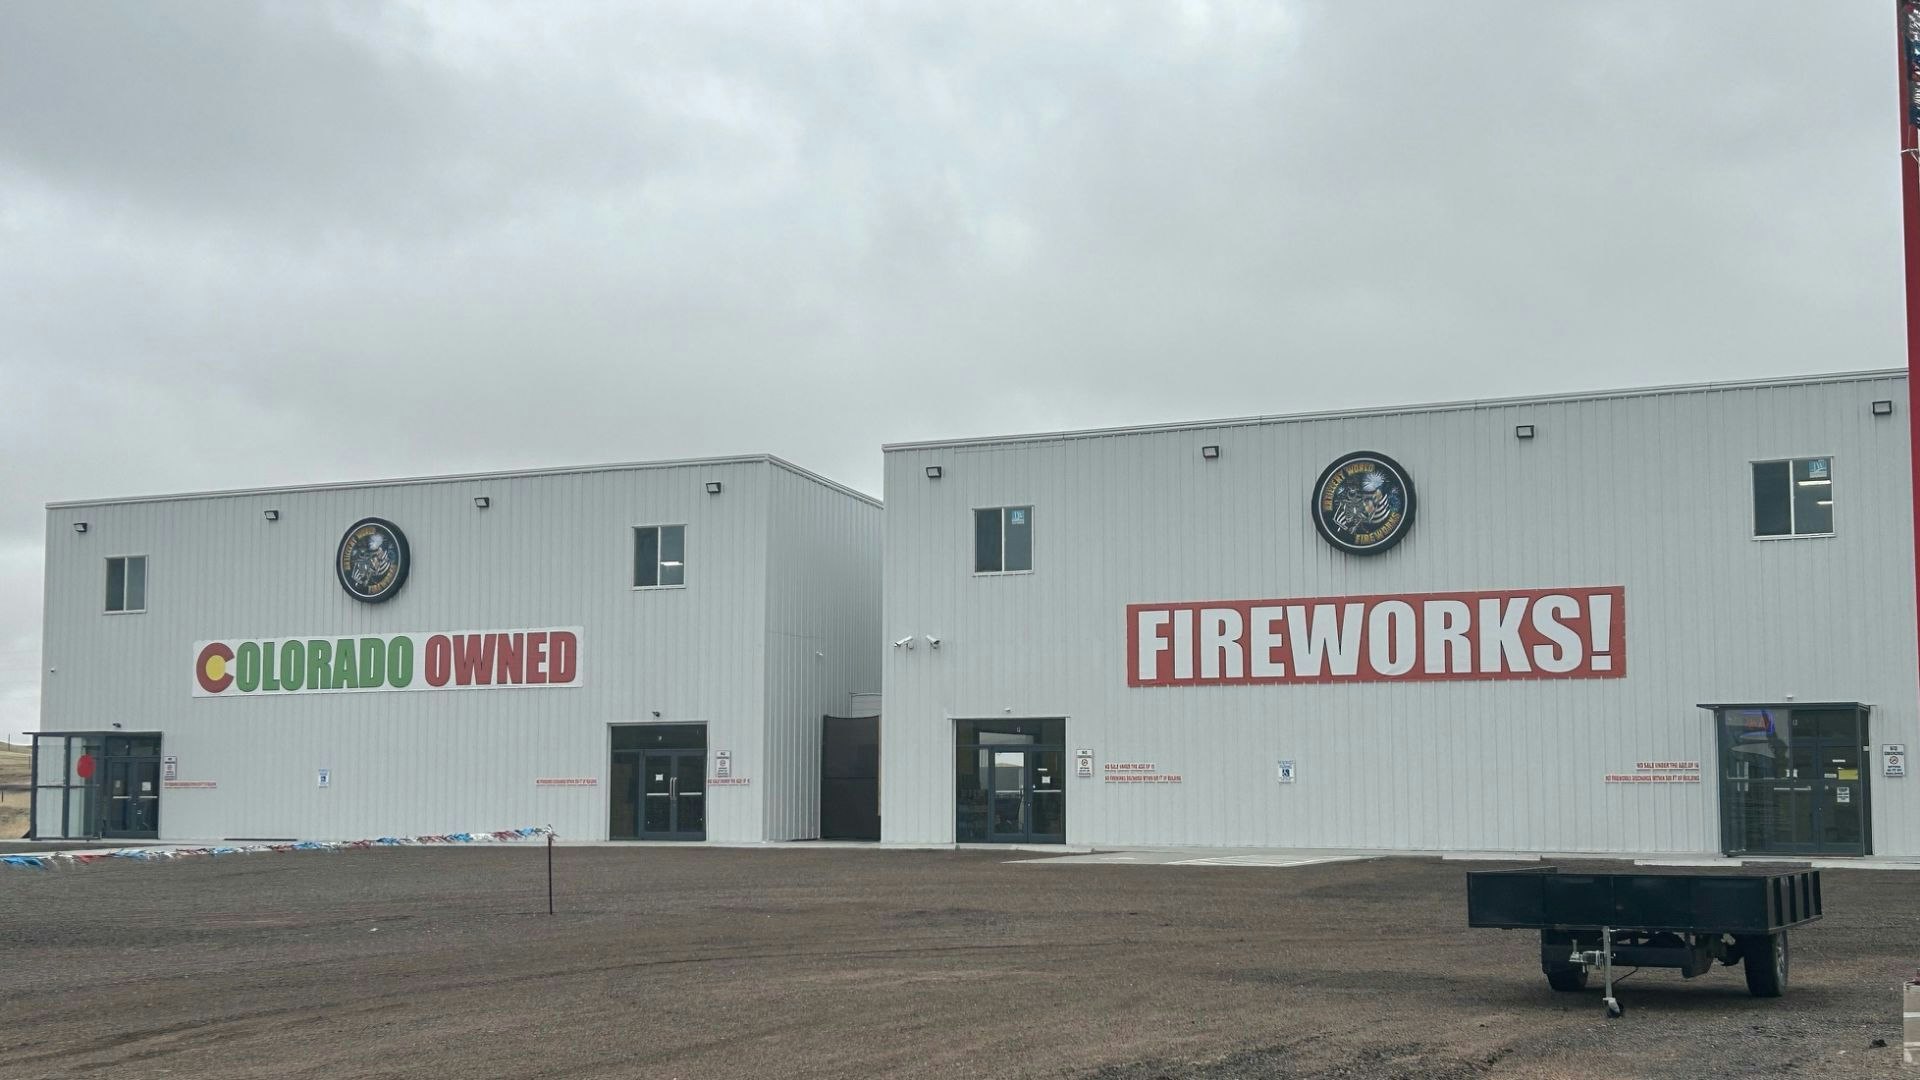 Mike Elliott, whose daughter owned Jurassic Fireworks and Artillery World, said the county commissioners and other surrounding business owners do not like them due to the Elliotts being from Colorado.